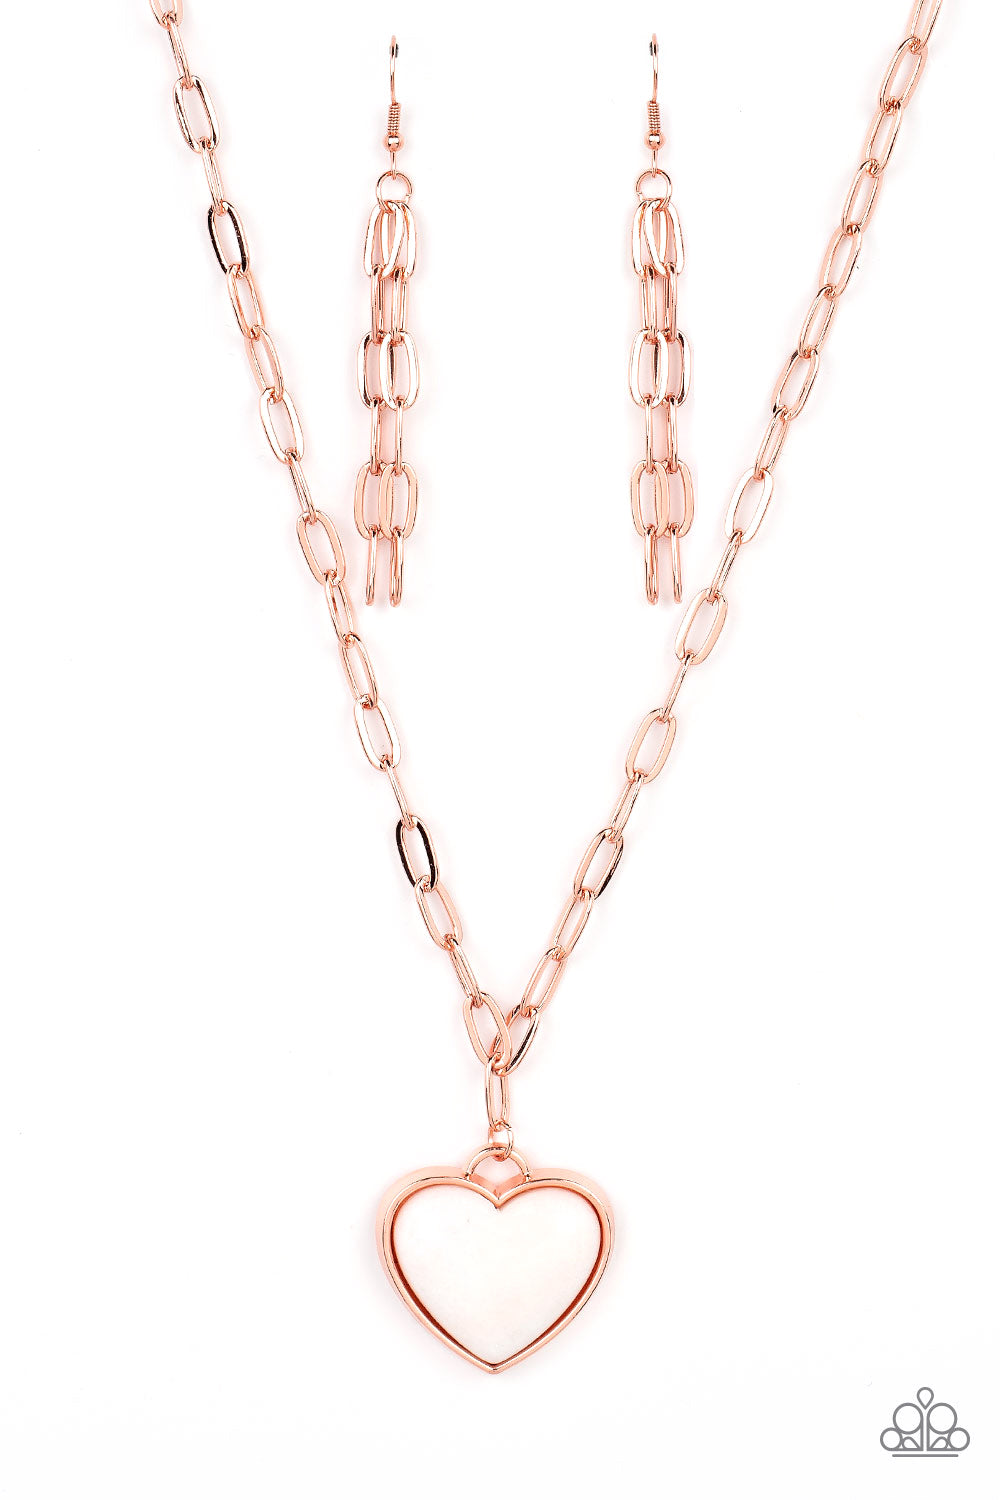 Everlasting Endearment Copper Necklace - Paparazzi Accessories  Chiseled into a charming heart, a quartz-like gemstone is pressed into the center of a shiny copper fitting at the bottom of a shiny copper chain for a sentimental statement. Features an adjustable clasp closure.  Sold as one individual necklace. Includes one pair of matching earrings.